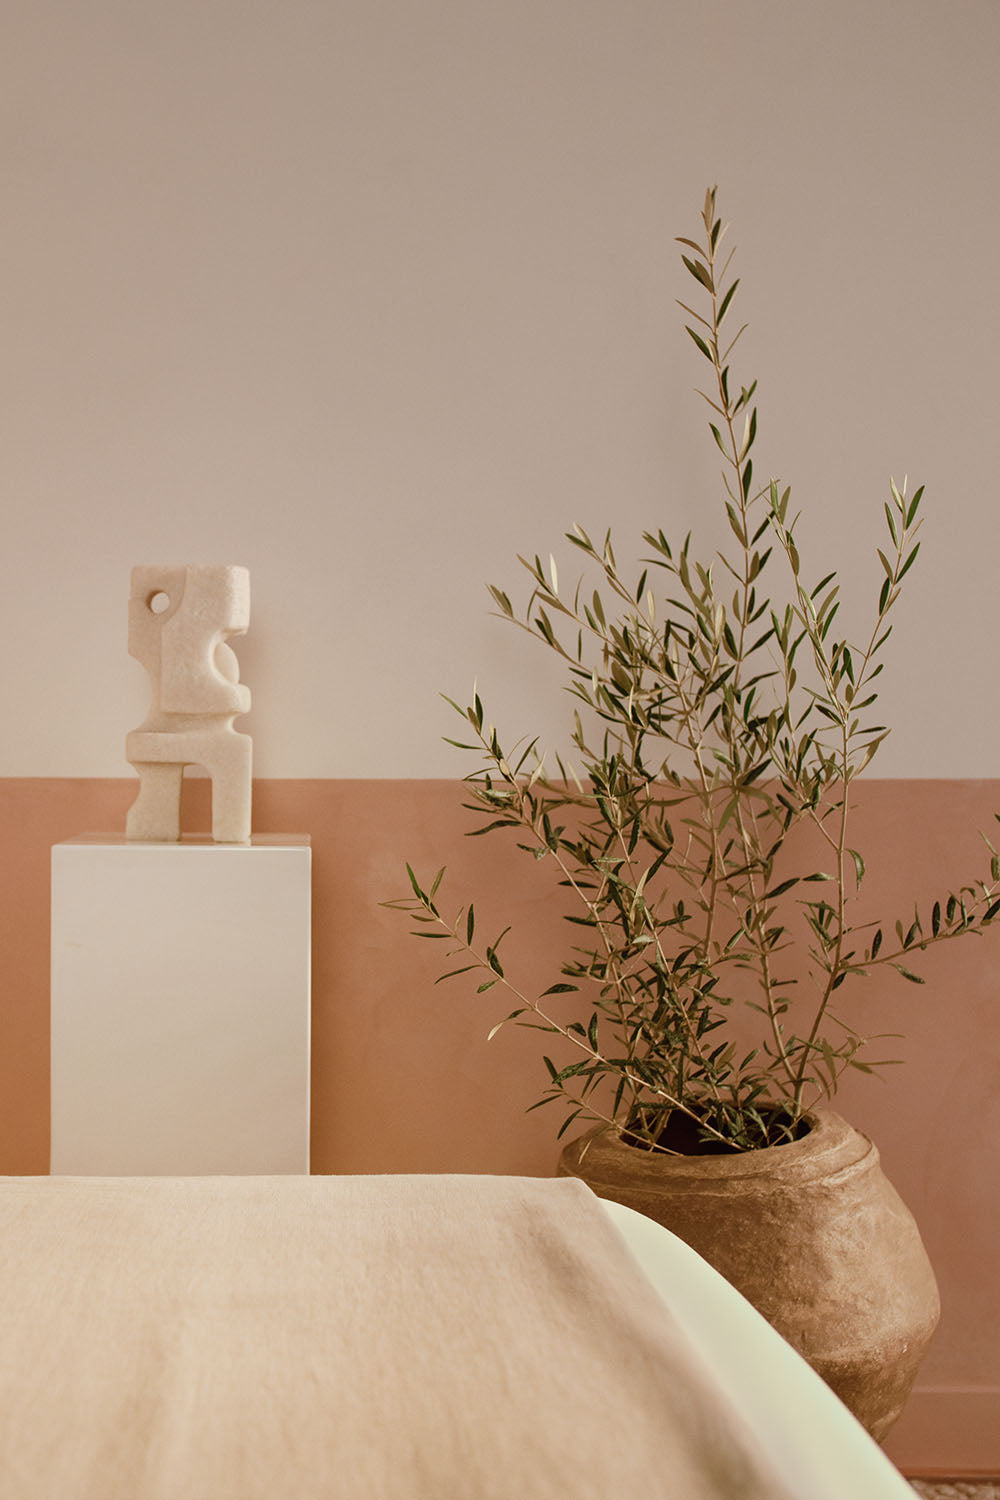 Image of foot of bed with small decorative statue and olive tree in pot against wall.